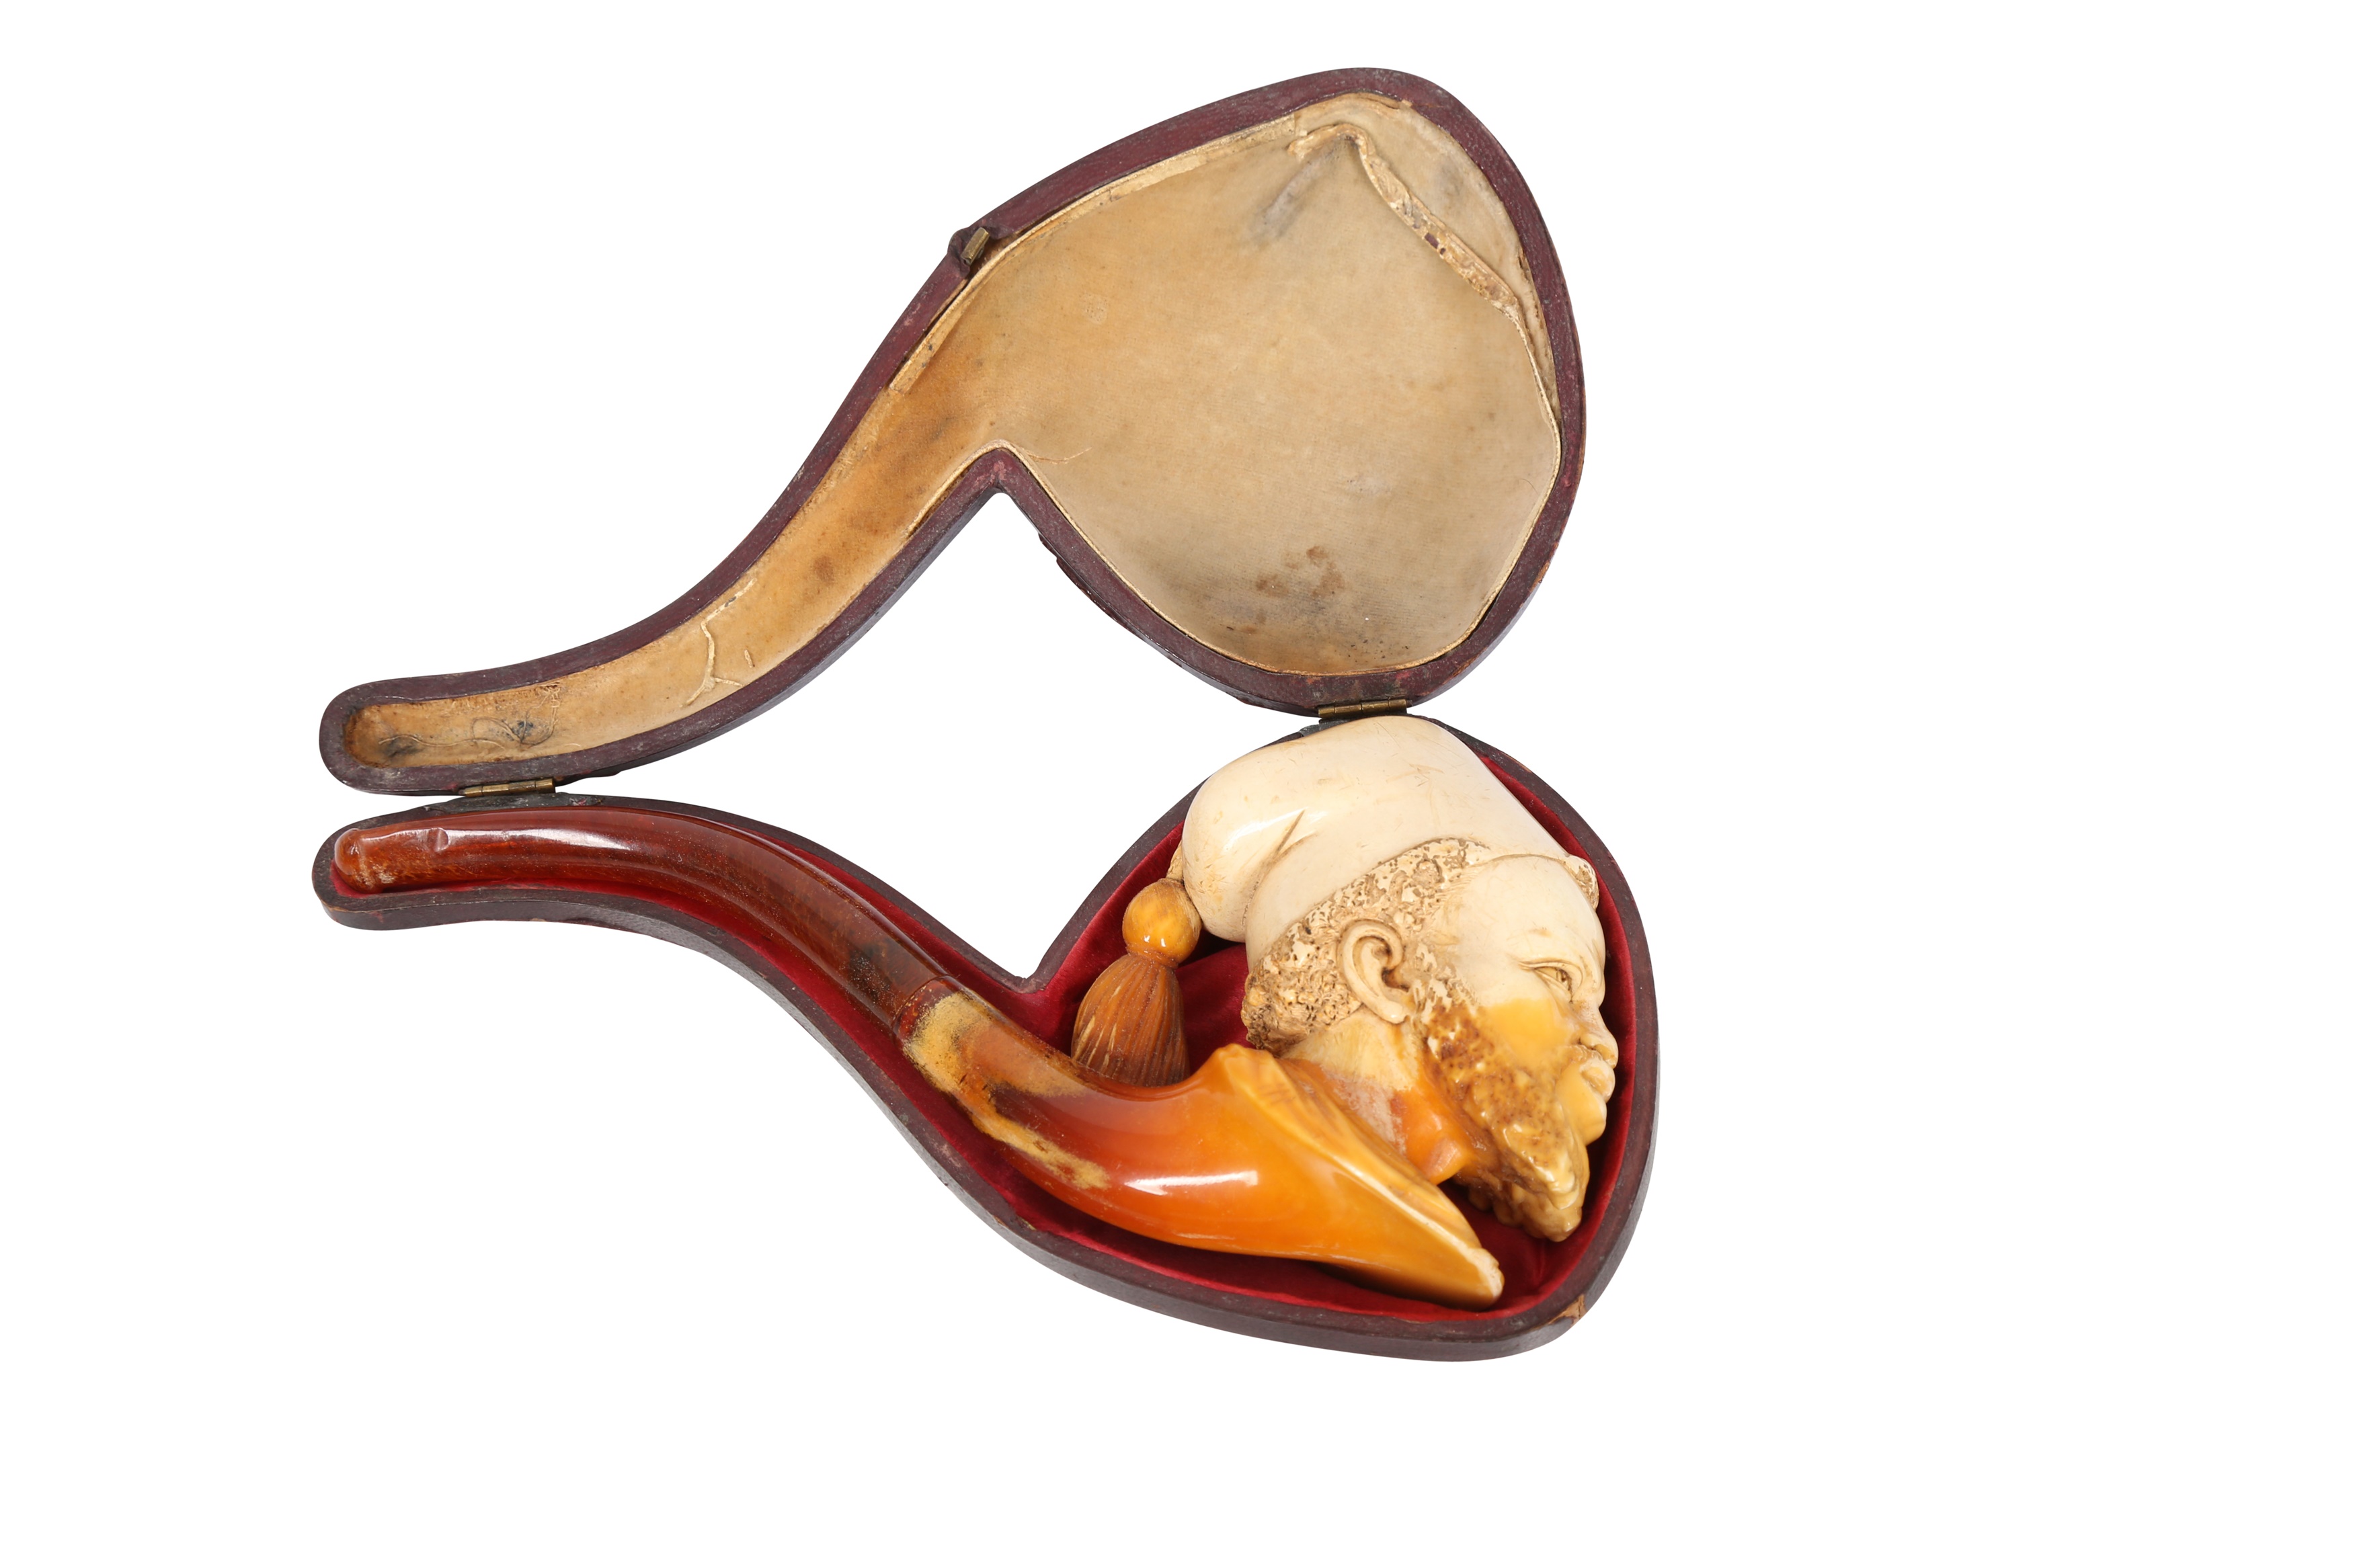 A CASED MEERSCHAUM PIPE WITH A TURKISH PASHA'S HEAD - Image 4 of 6